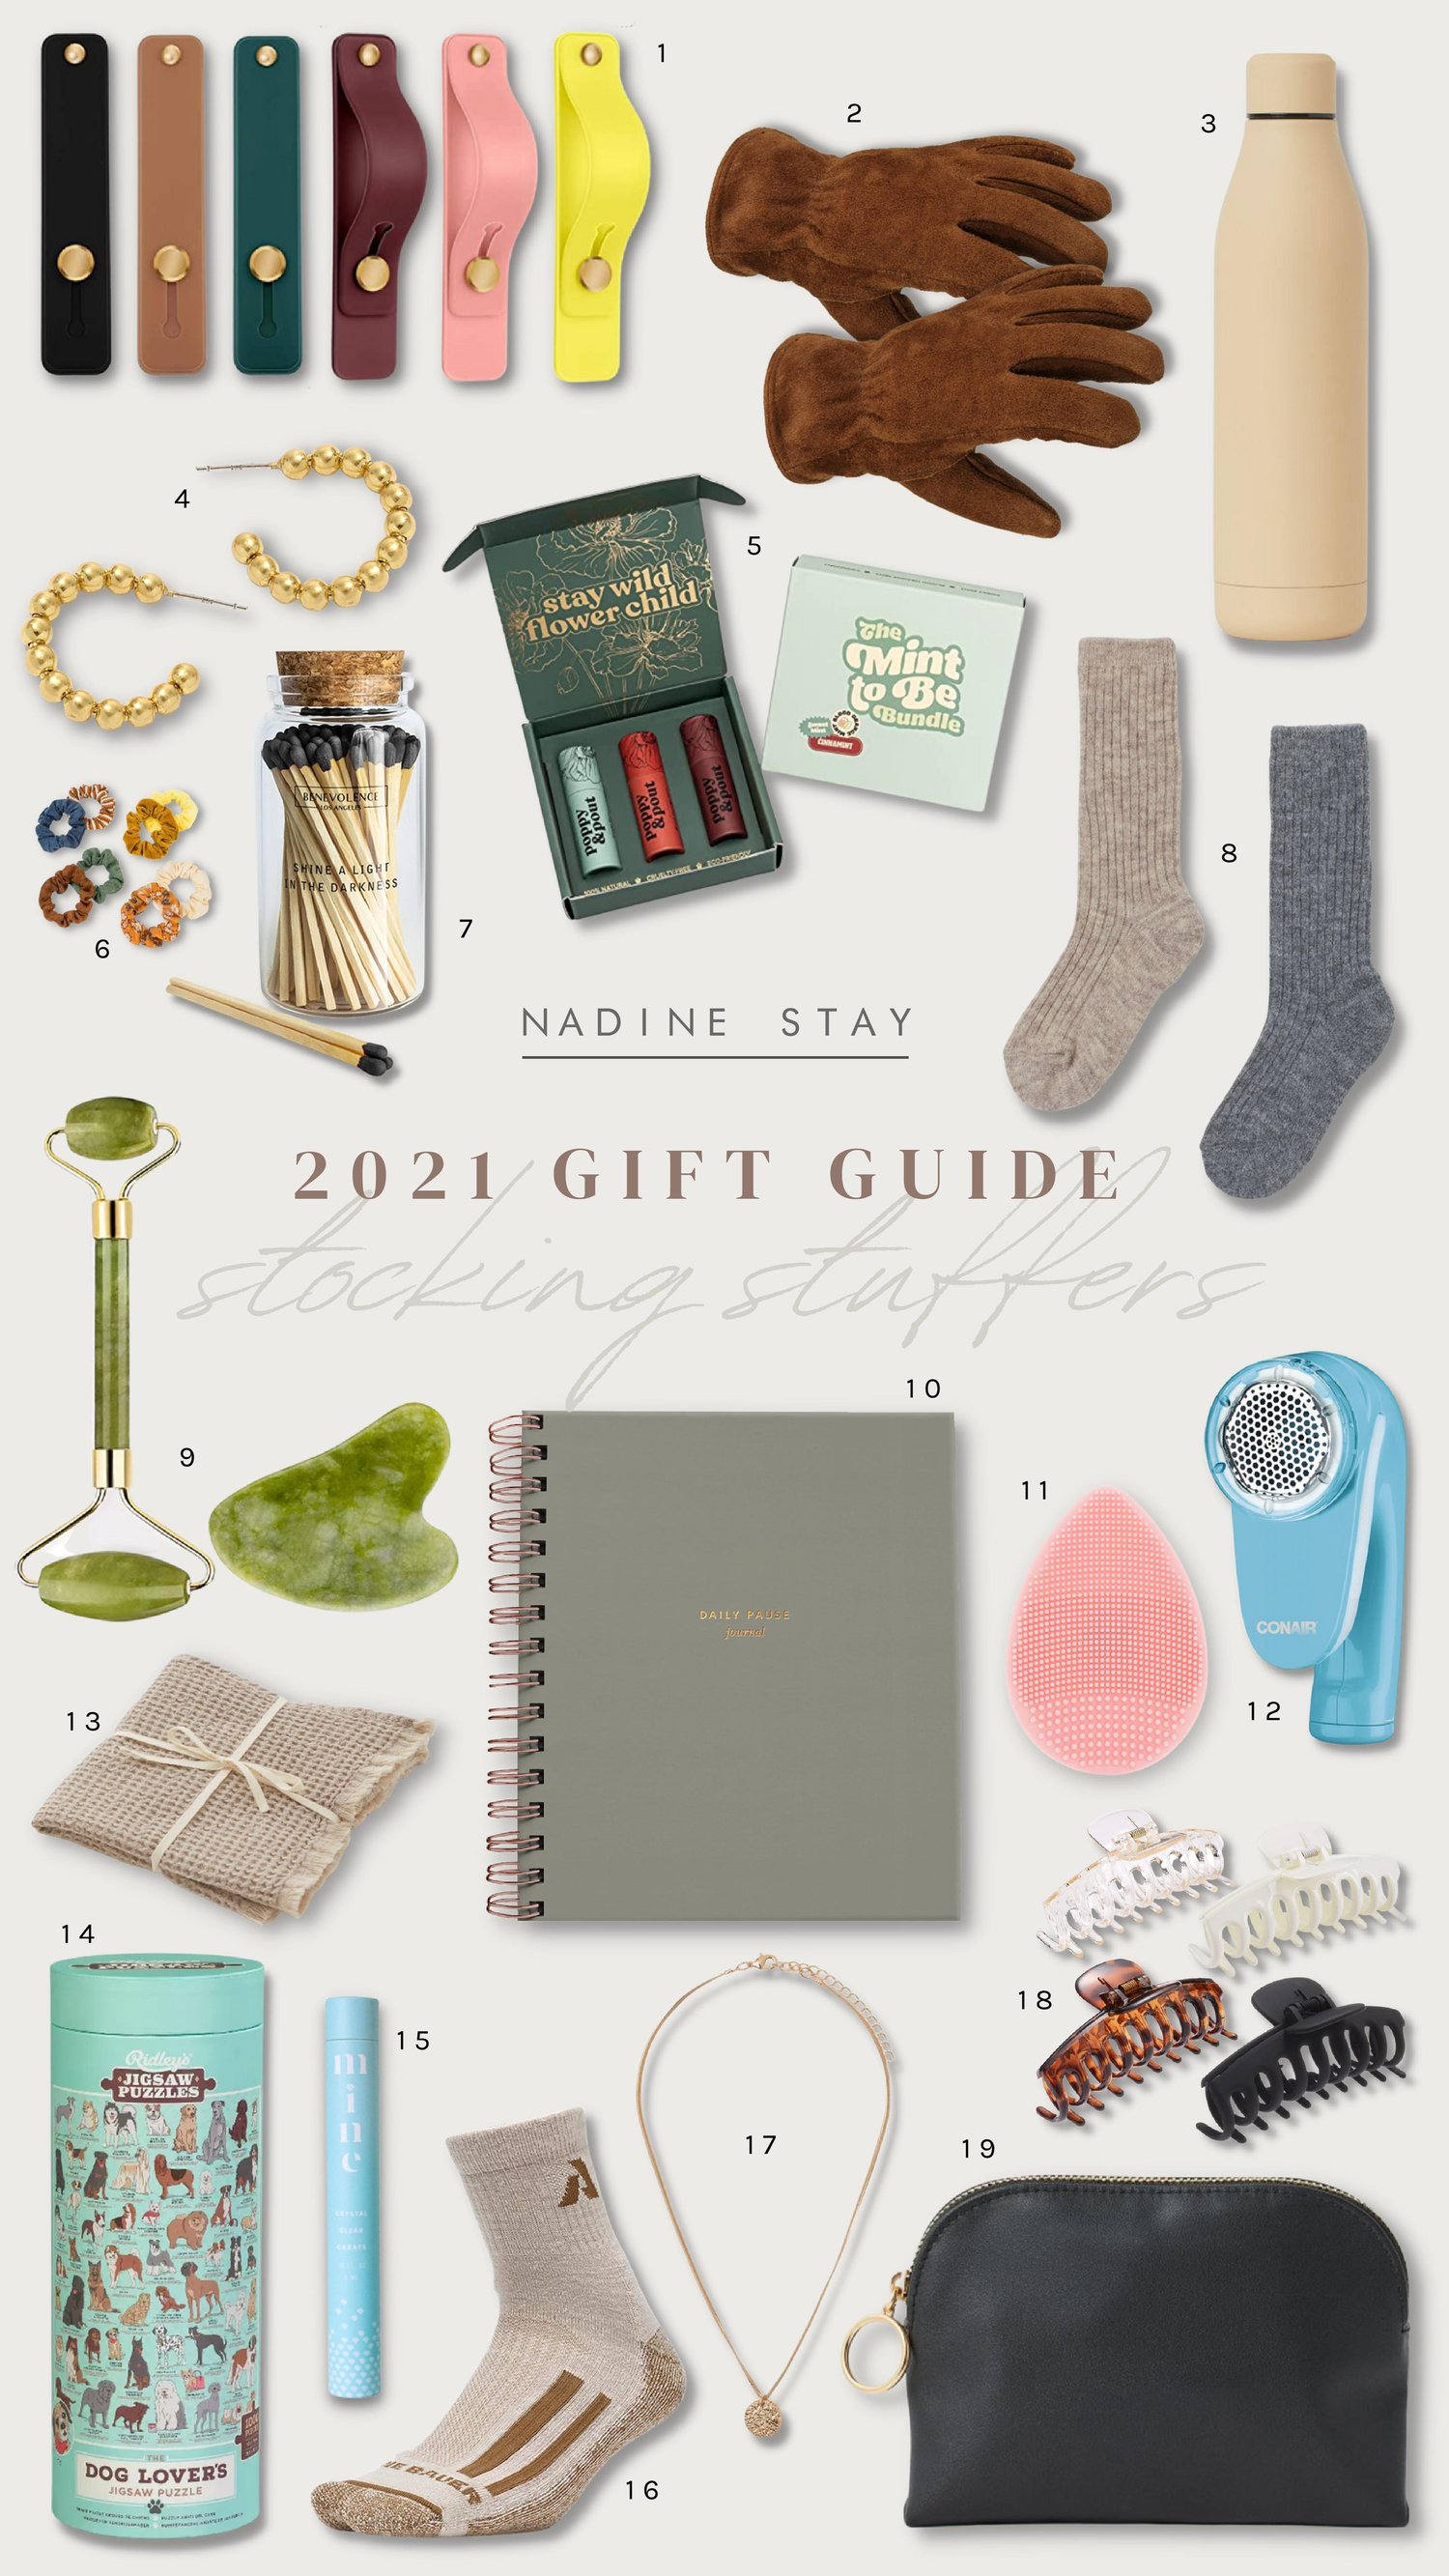 Christmas Gifts For Men He'll Love (+Stocking Stuffers)